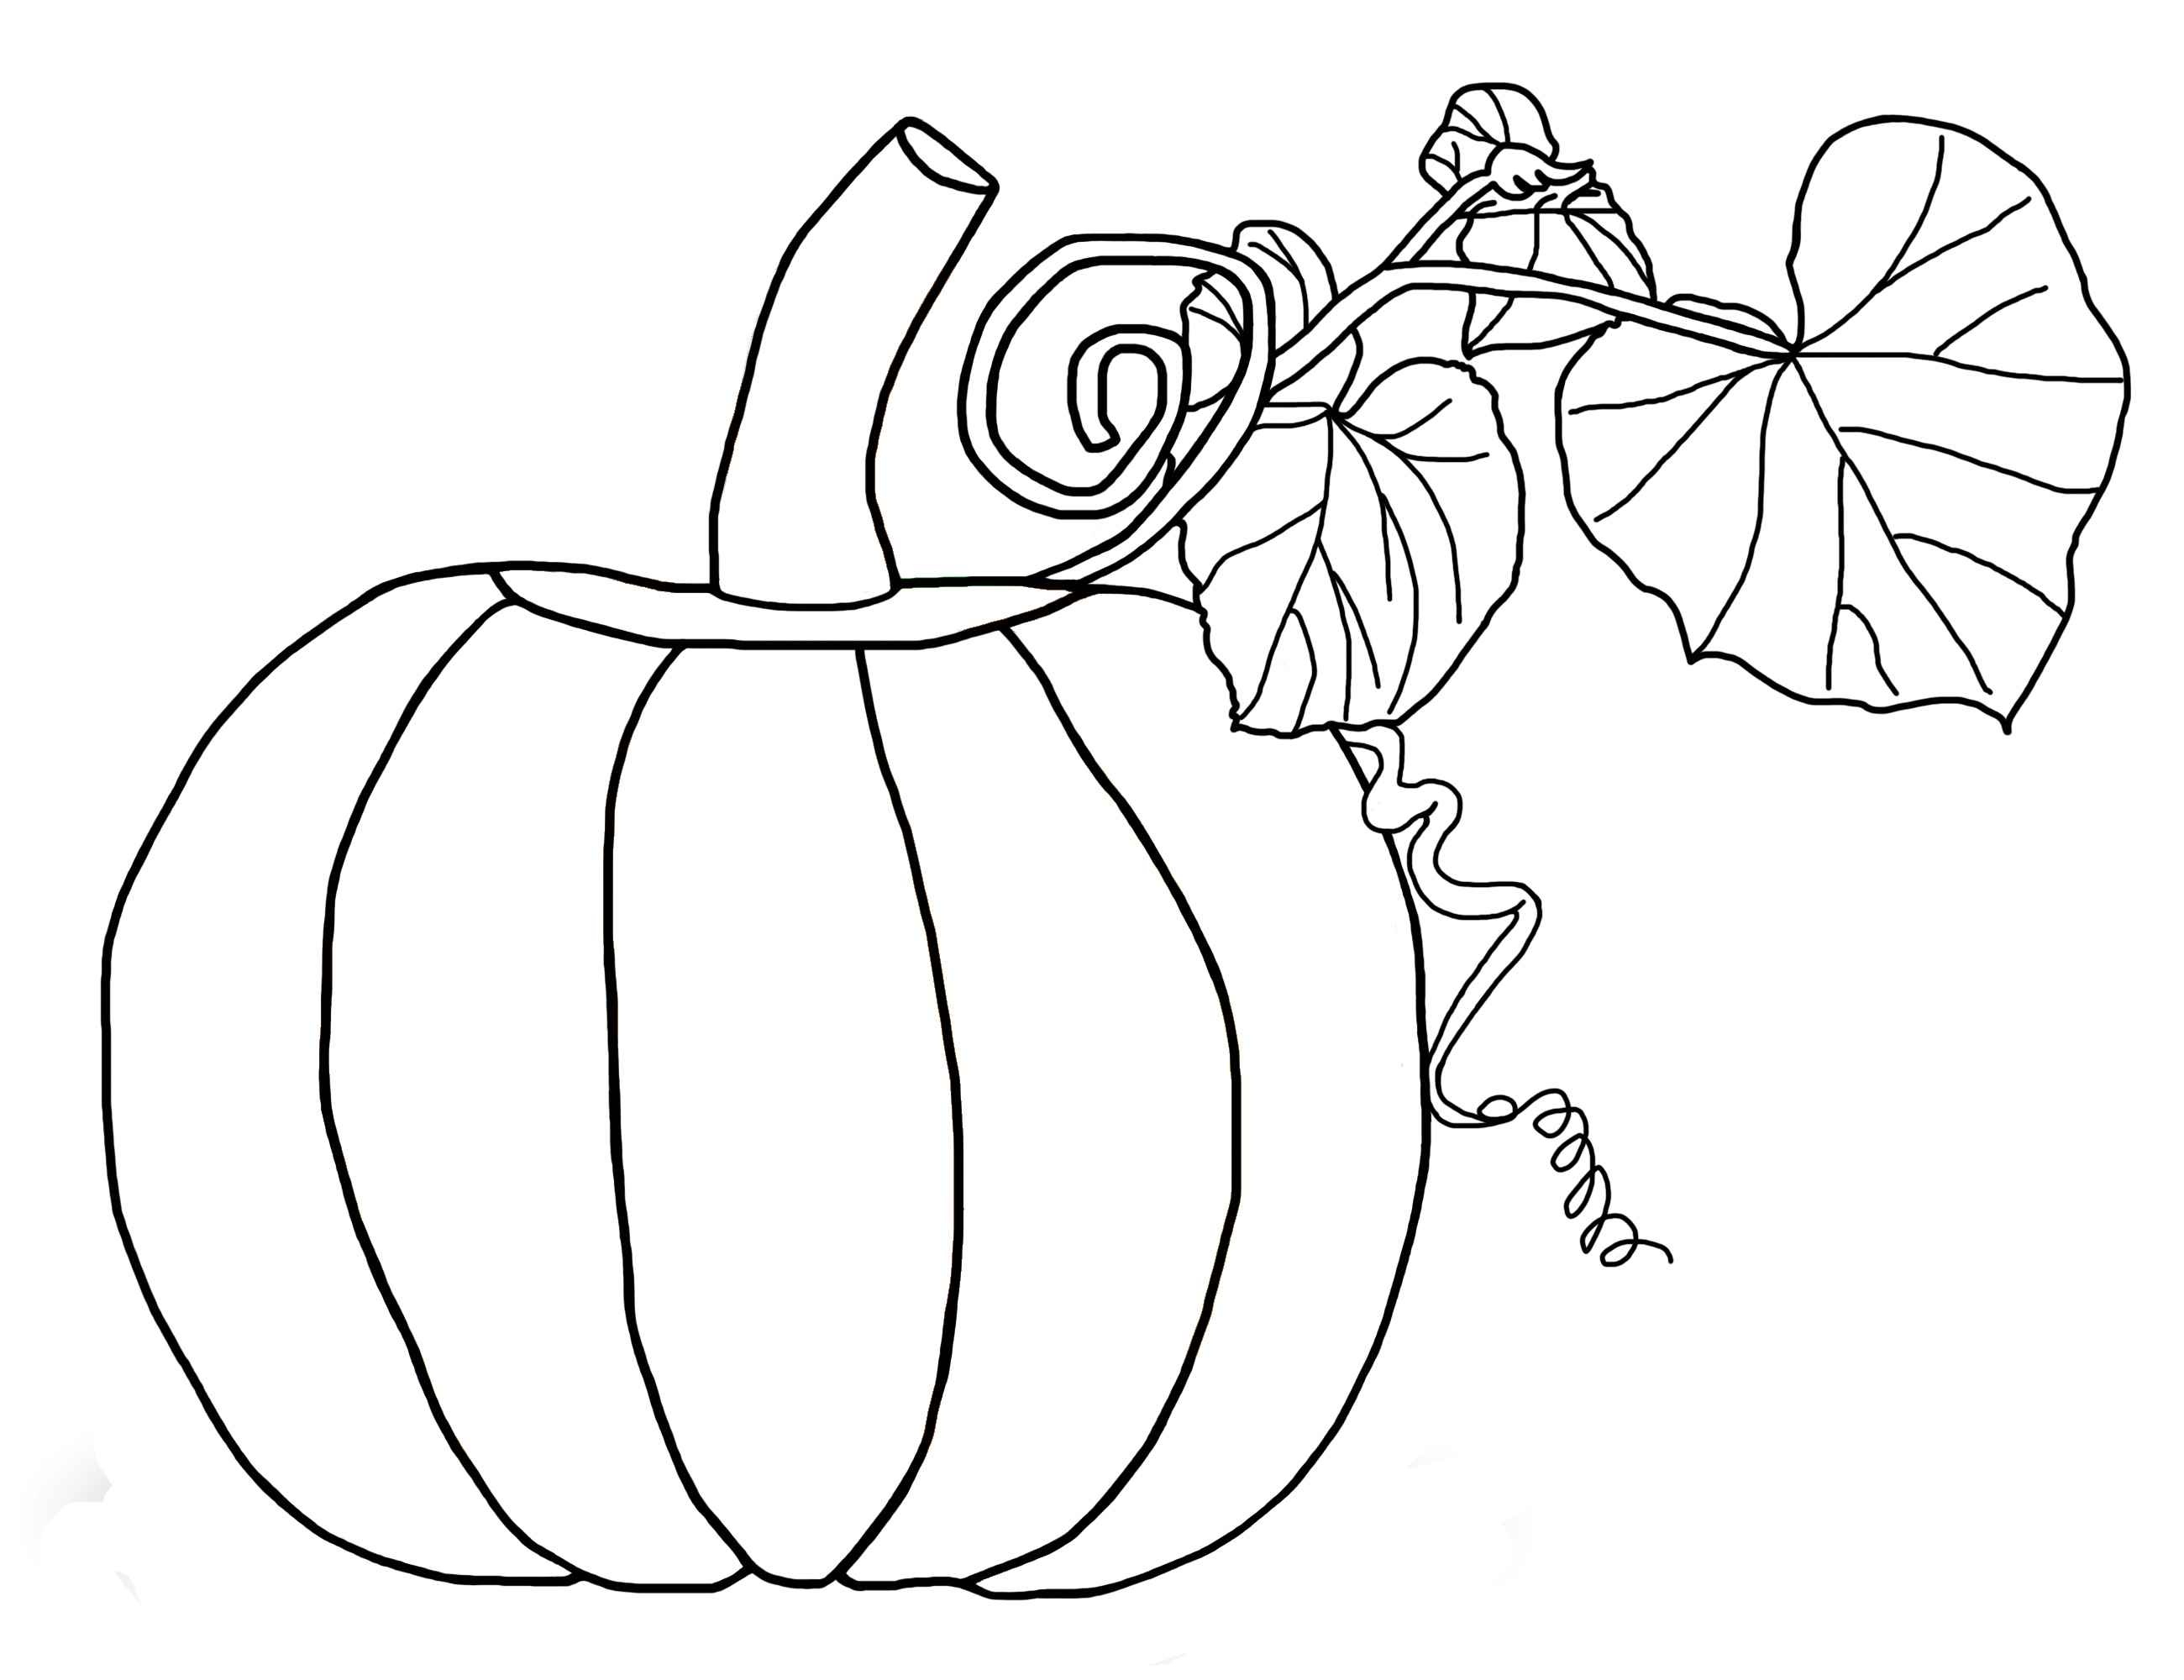 Free Pumpkin Coloring Pages For Kids - Free Printable Pumpkin Books